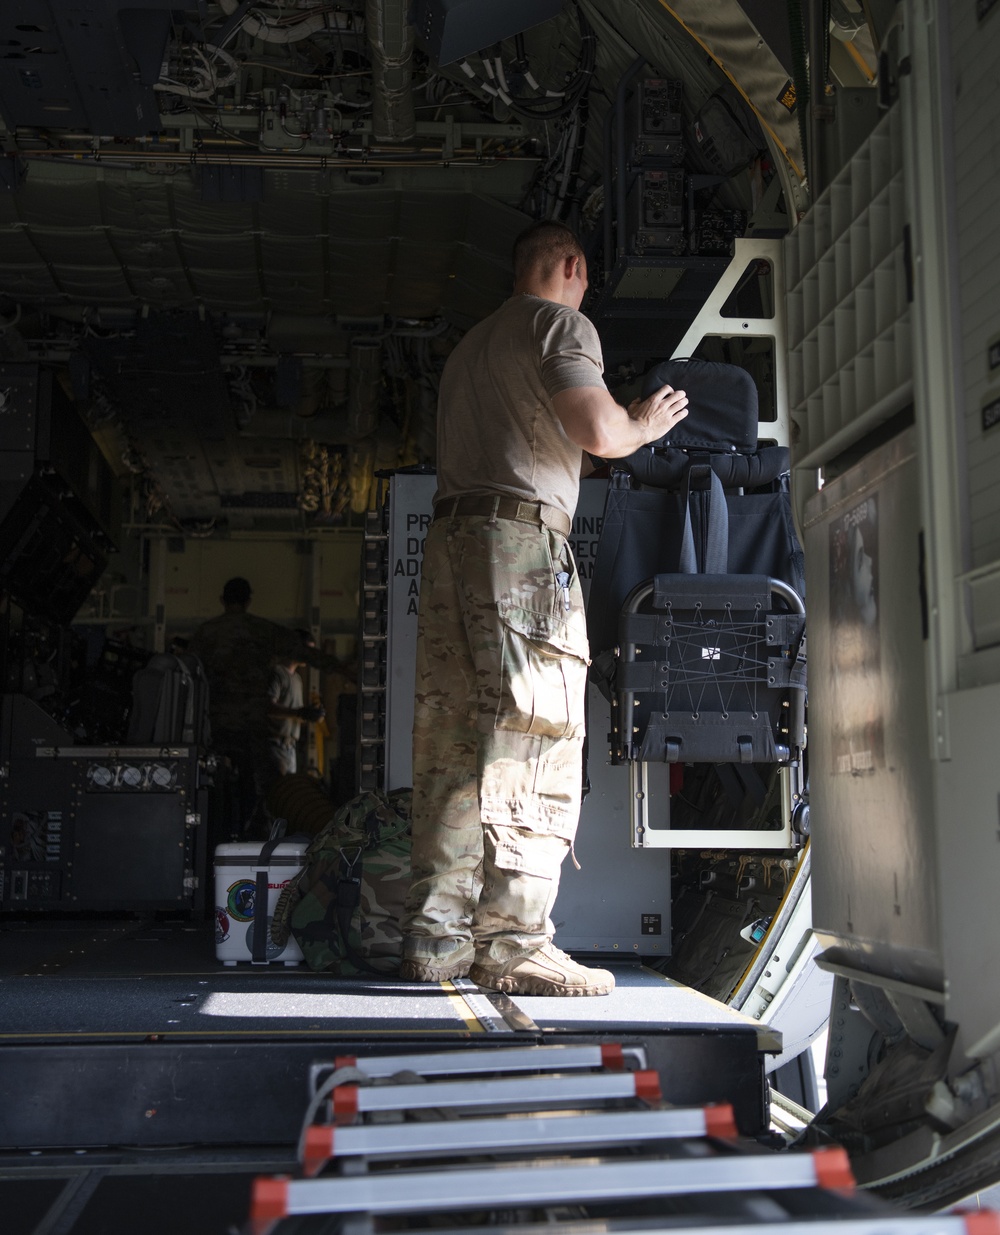 Reservists prepare for AC-130J training mission